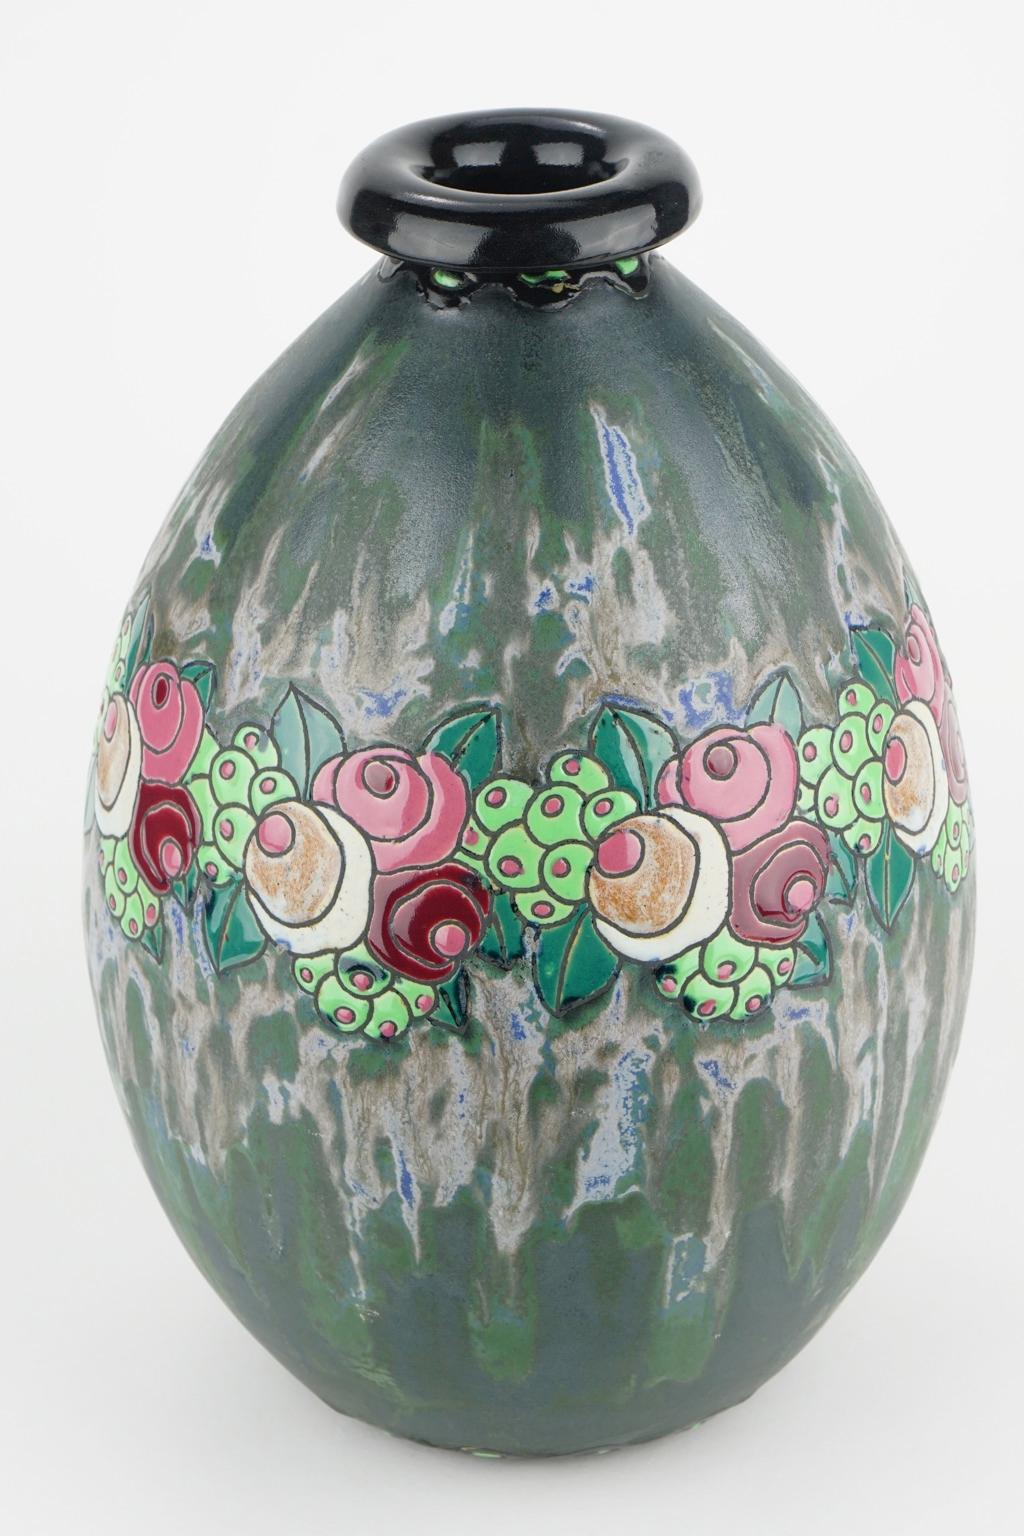 This Art Deco Keramis stoneware vase has a polychrome design with a garland of stylised small roses, leaves and fruits in a blue and dark green background. D 700. F 960. Charles Catteau (1880-1966).

Size: Height 32 cm, diameter base 9.3 cm,